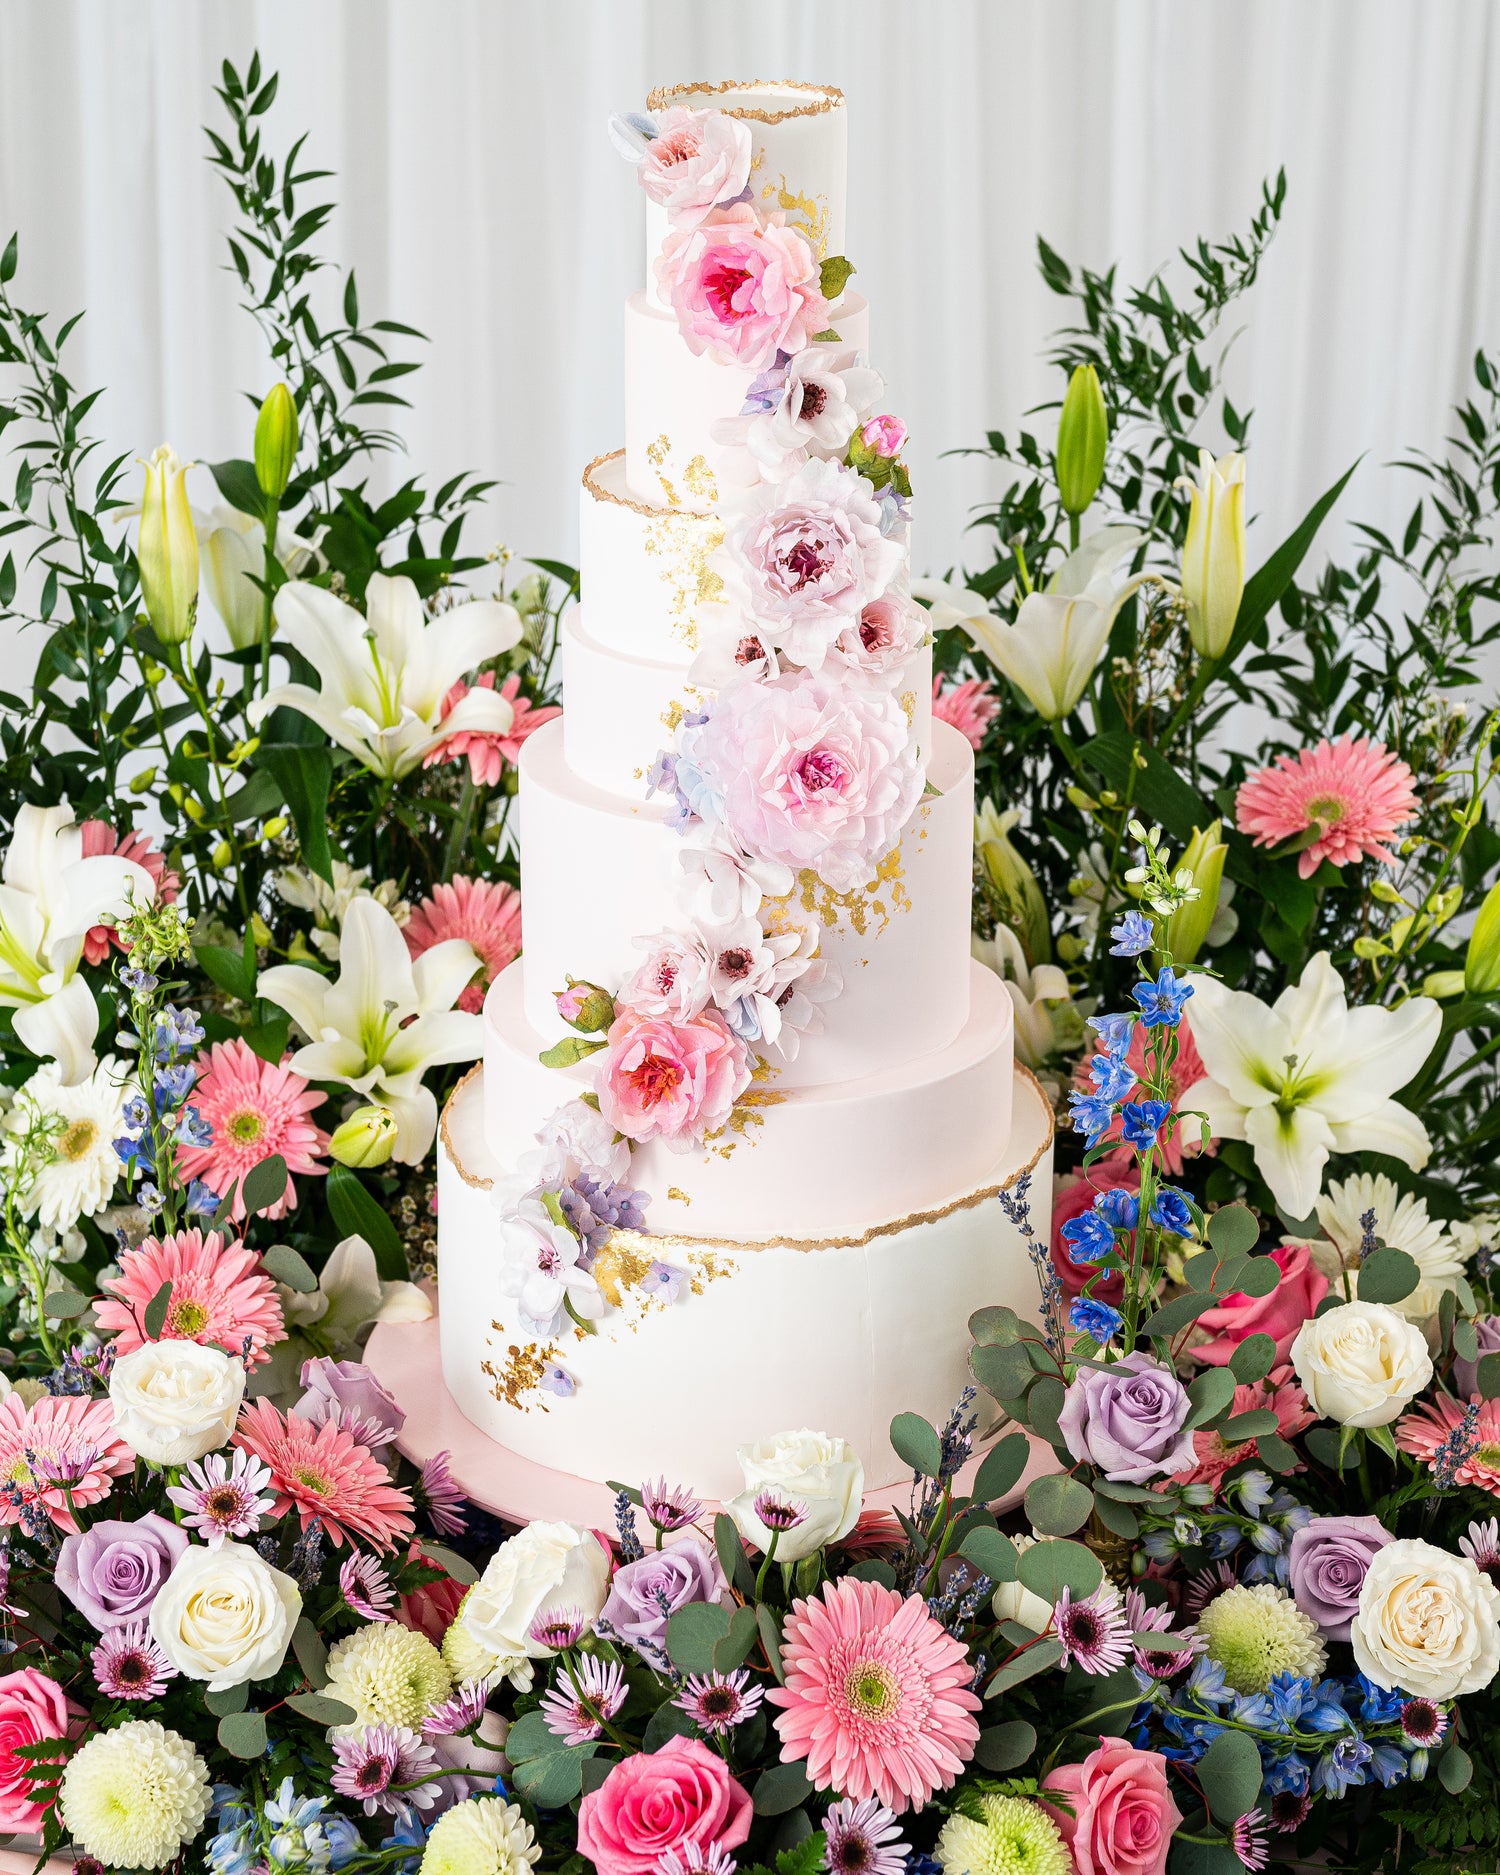 editorial tall wedding cake by sugar nursery with handmade wafer paper flowers in pink, blue, and lavender, gold leaf accents, live edge cake surrounded by flowers